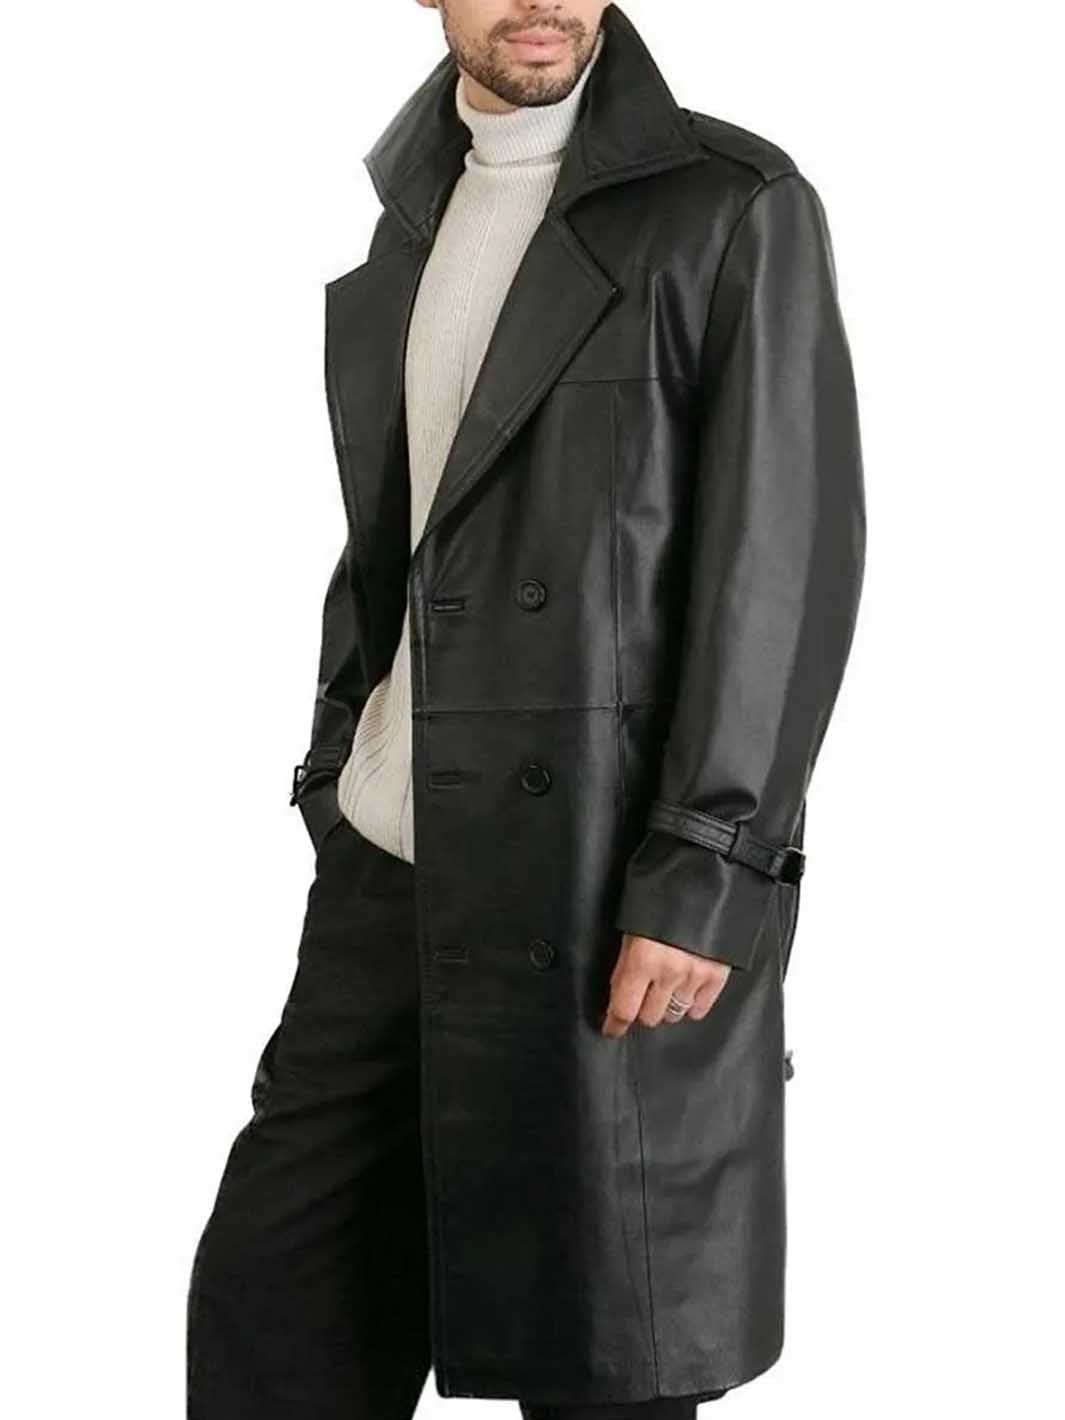 Mens Black Duster Overcoat Jacket with Real Leather